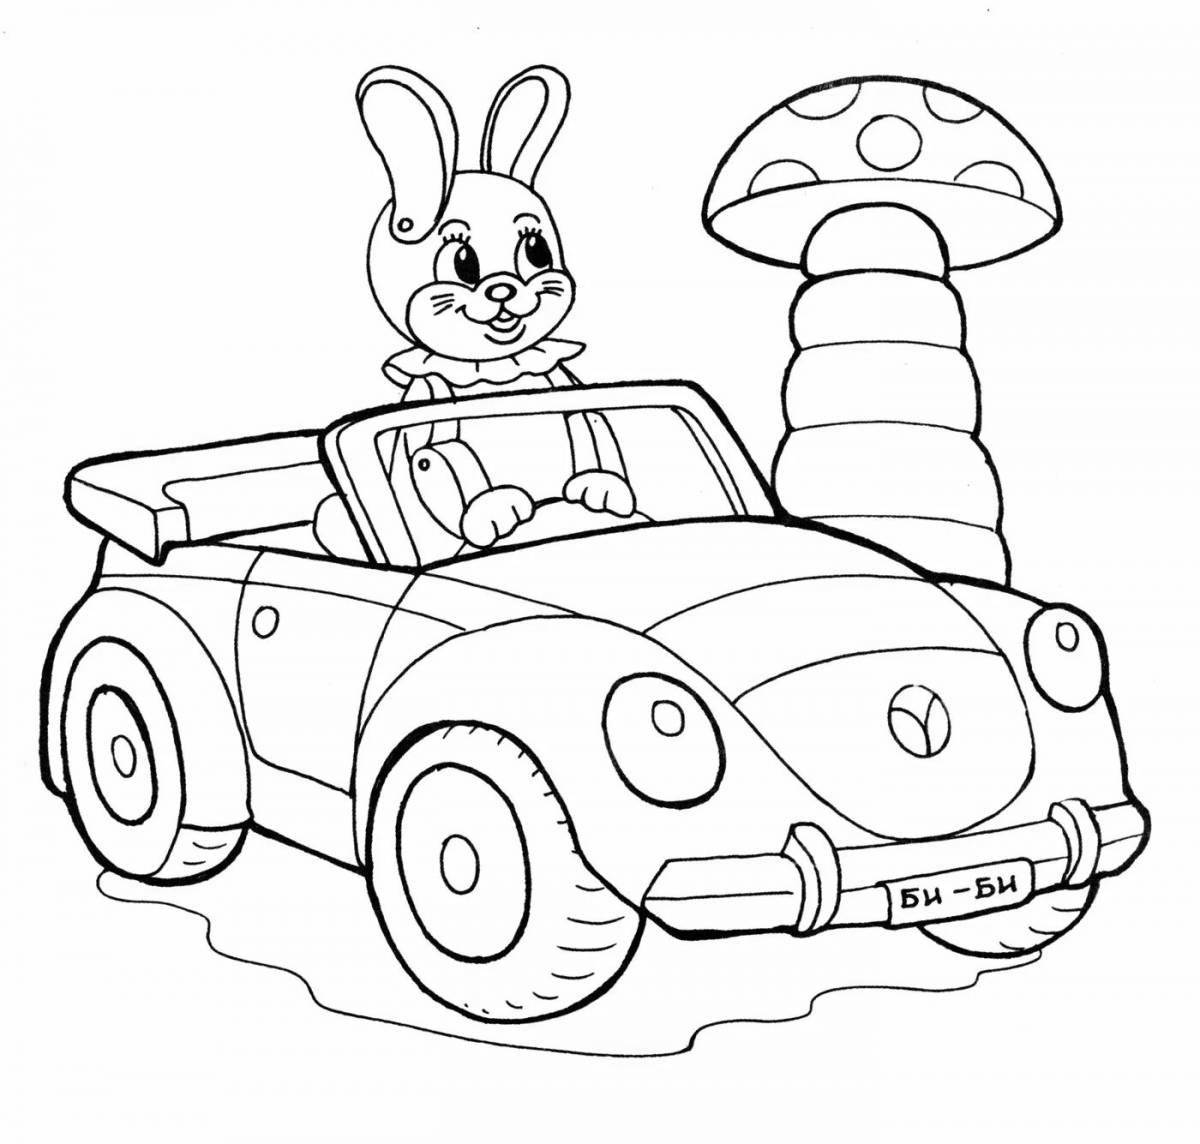 Wonderful cars coloring for boys 5-6 years old